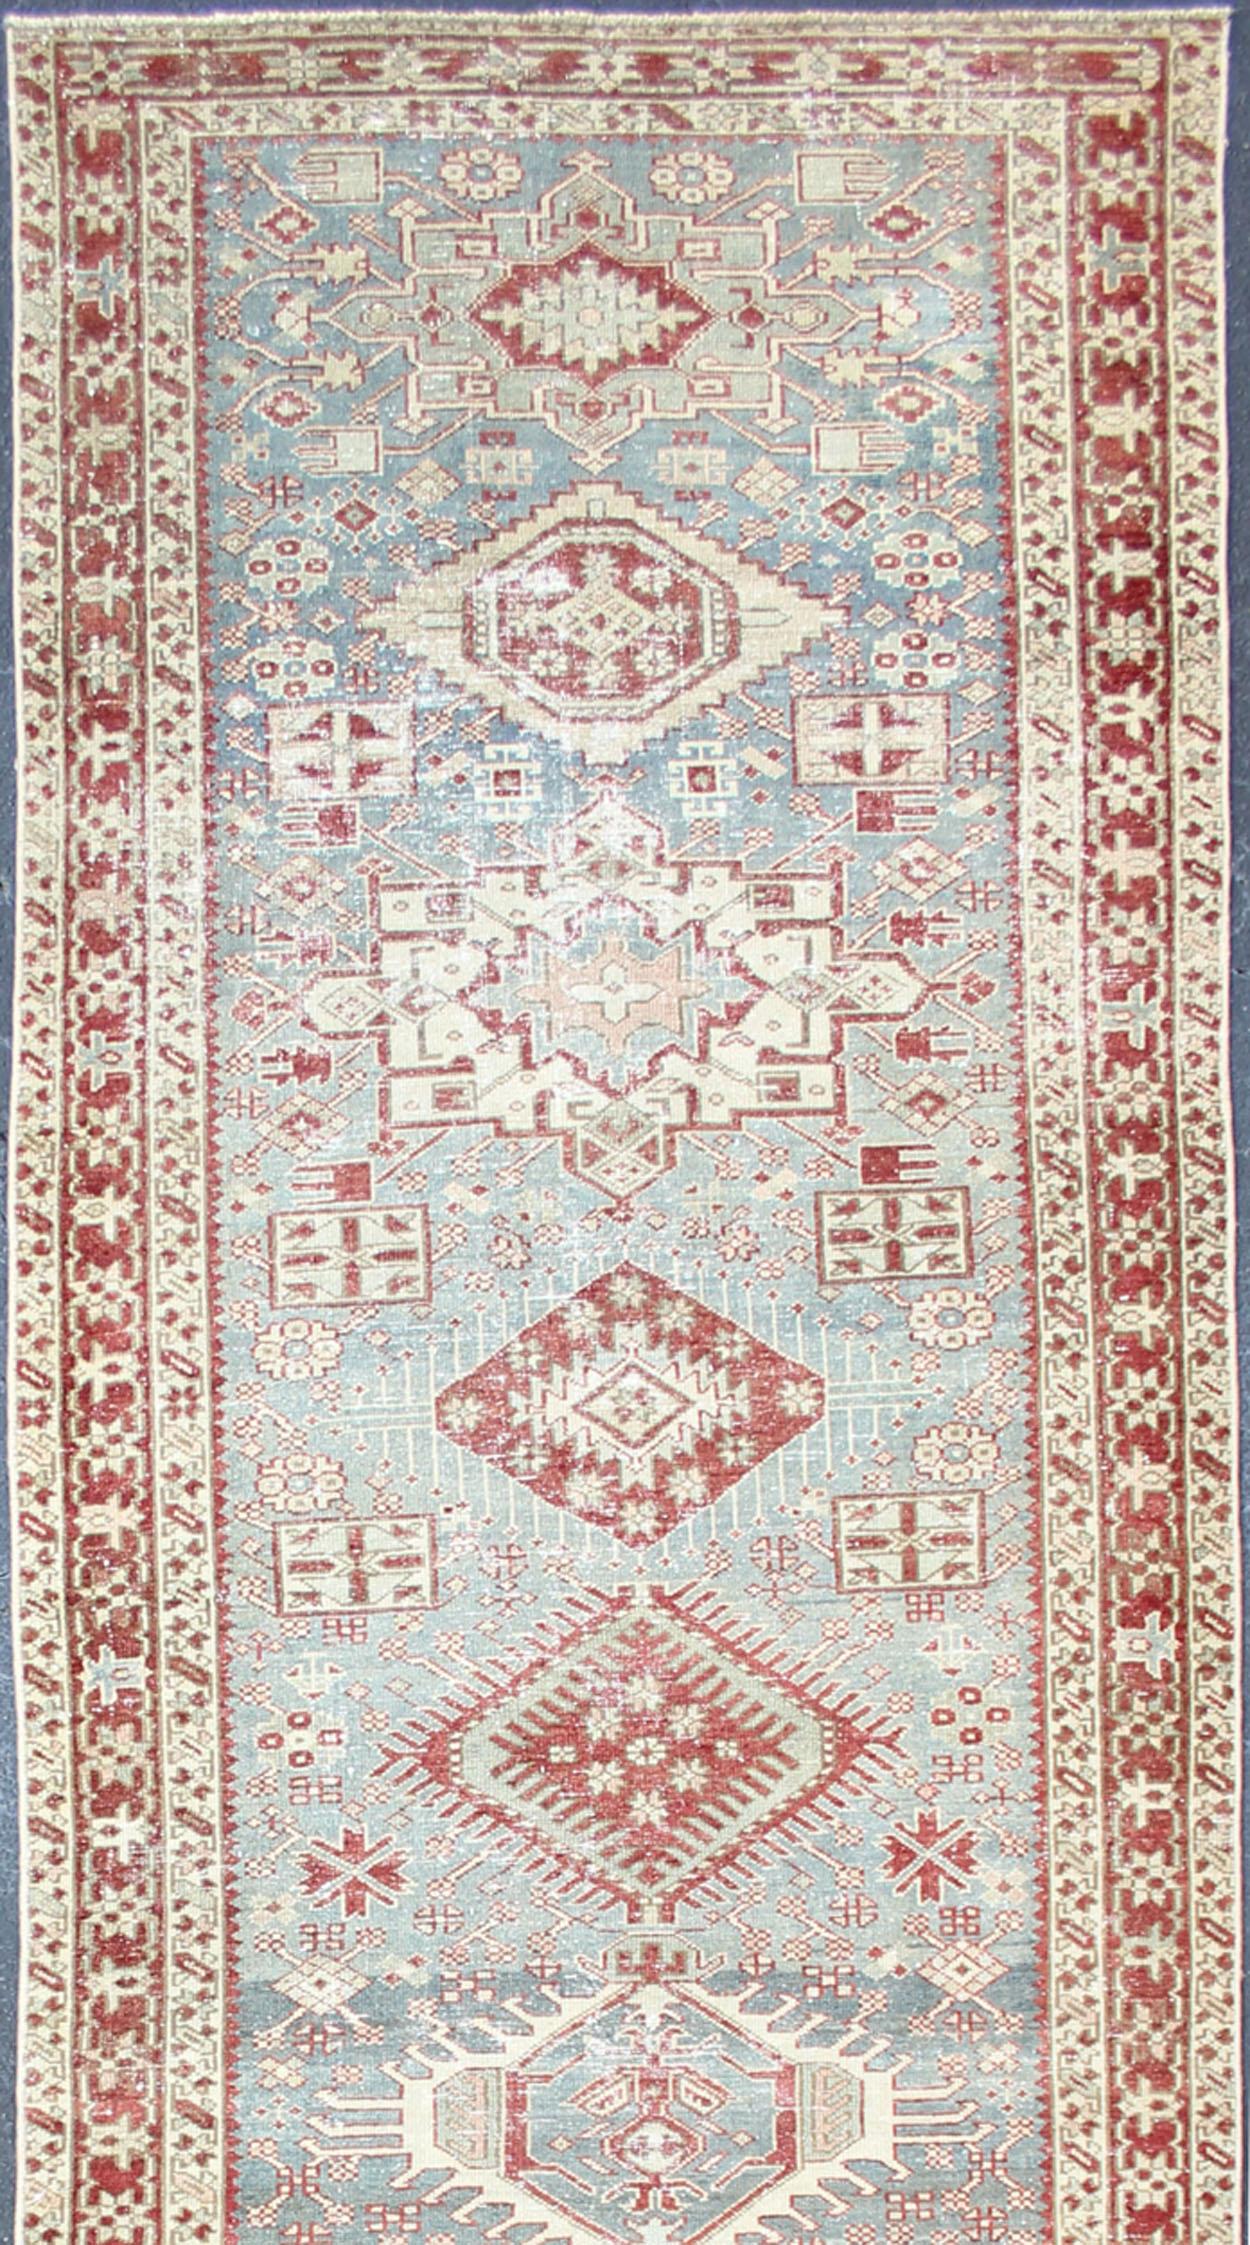 Persian distressed antique Heriz runner with geometric Medallion design in colorful tones including light blue, red, light green rust and brown, rug KBE-200202, country of origin / type: Iran / Heriz, circa 1920

Measures: 3'7 x 13'5

This